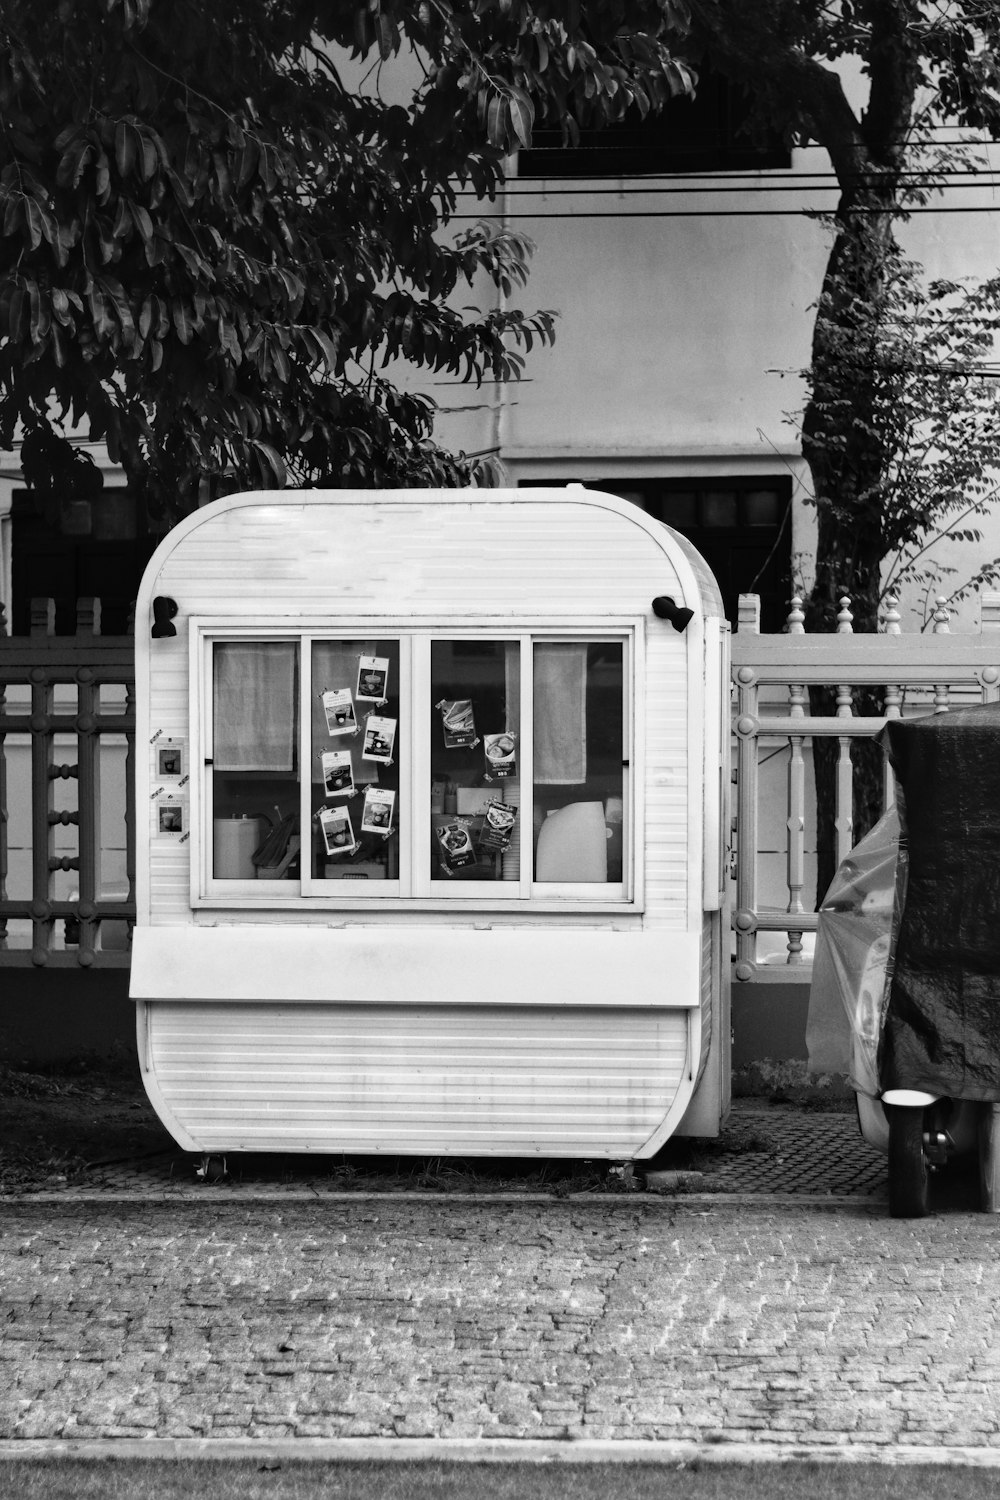 a black and white photo of a mobile home